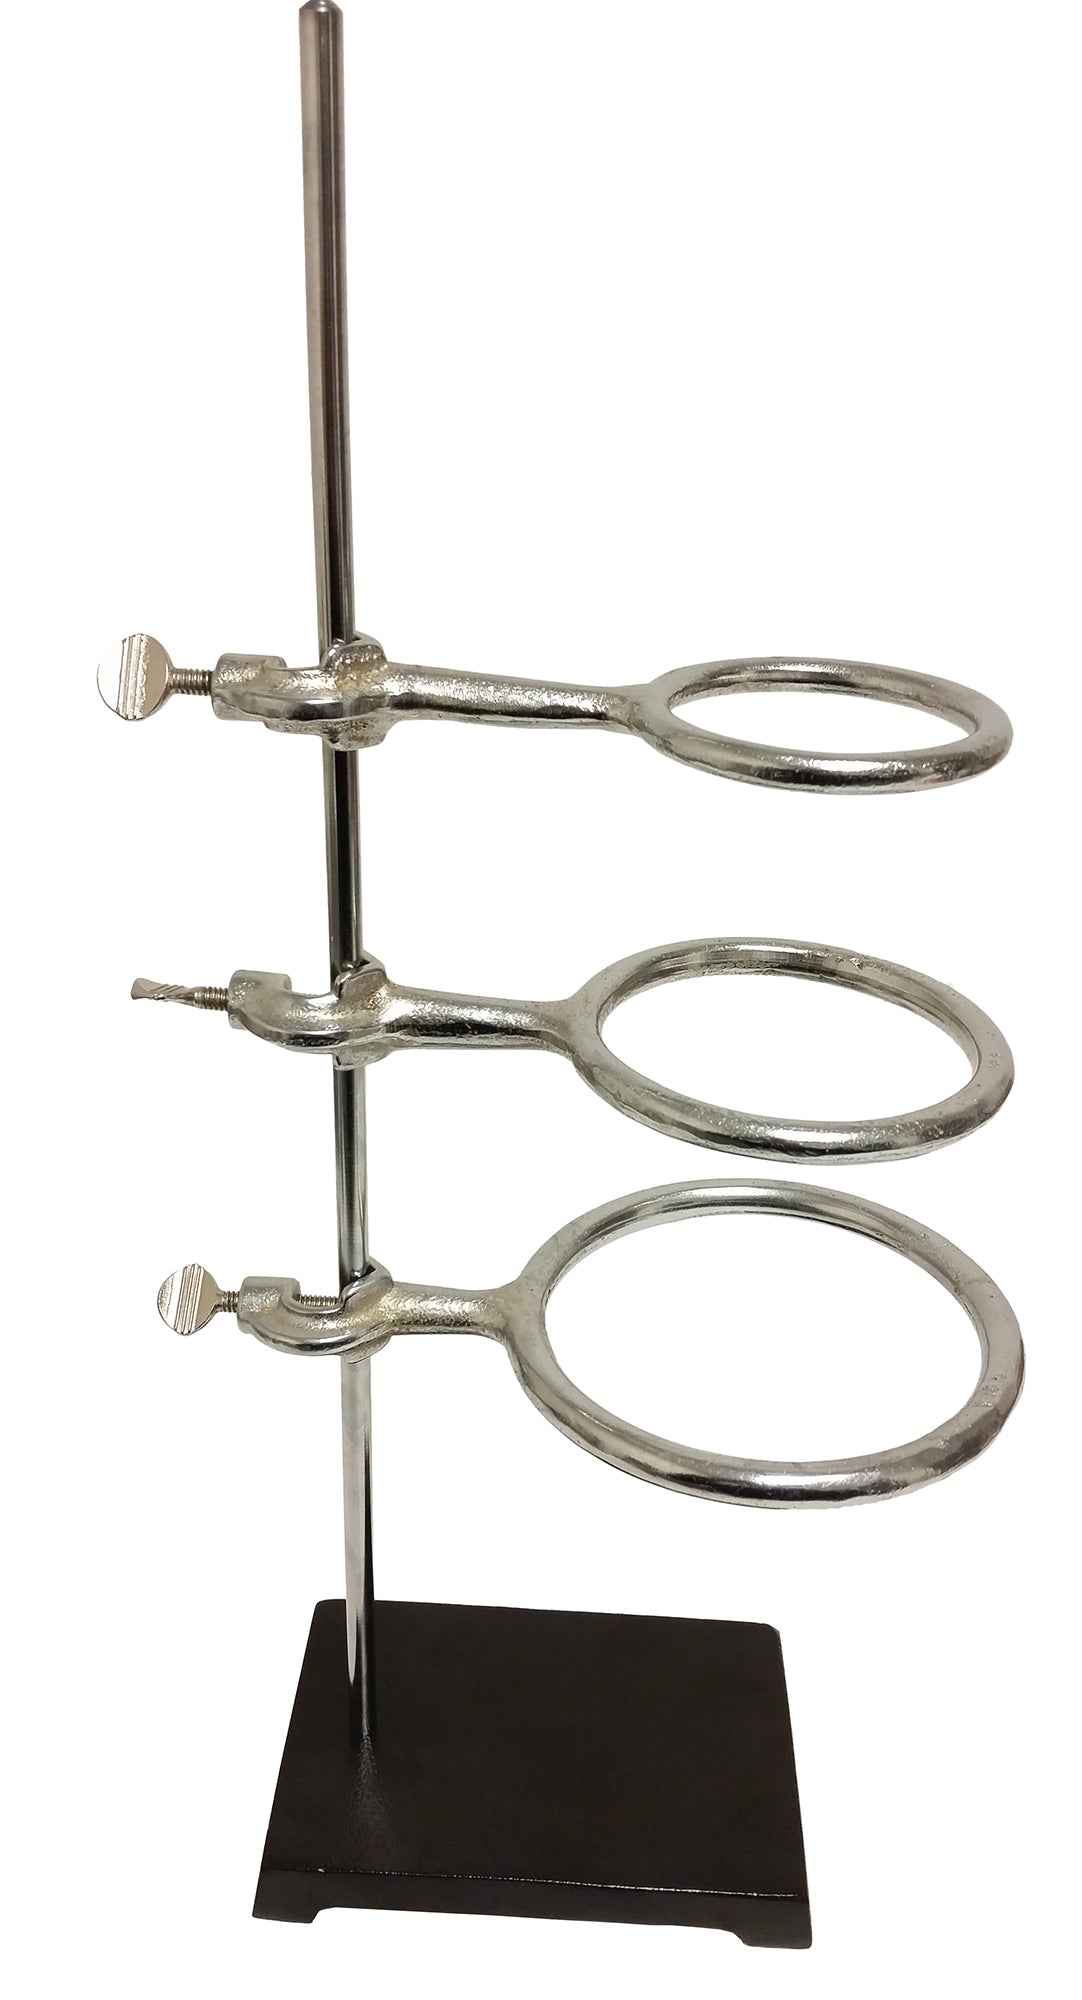 GSC International Crucible Tongs, 10 in. Stainless Steel